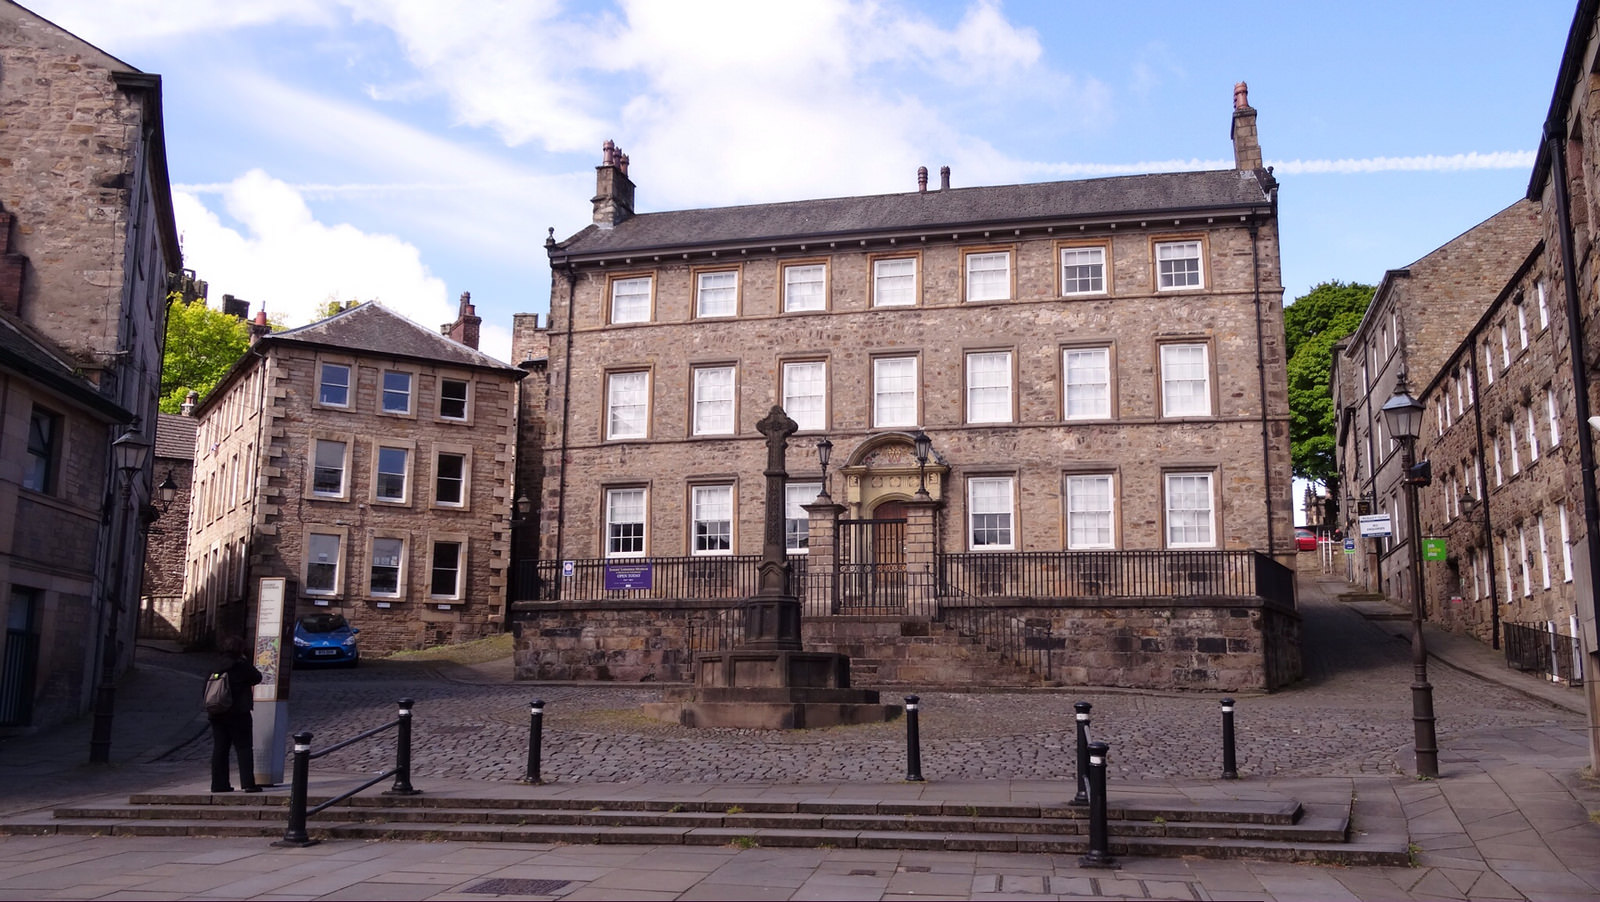 Judges' Lodgings where the witch hunter, Thomas Covell used to live. Lancaster. / CC2.0 Gidzy